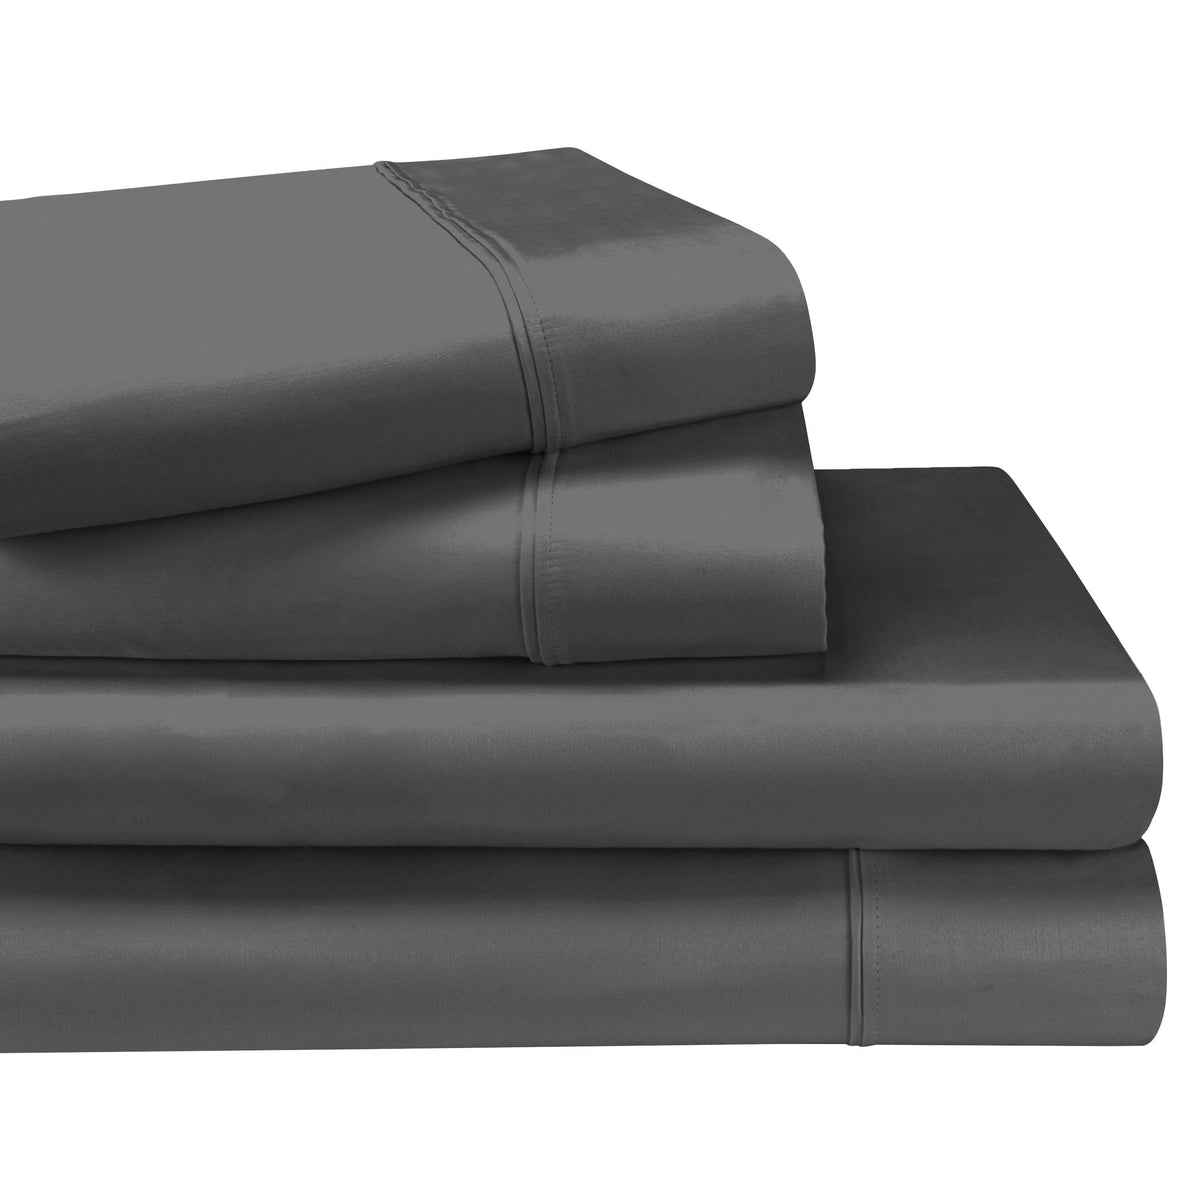 Egyptian Cotton 1200 Thread Count Eco-Friendly Solid Sheet Set - Charcoal